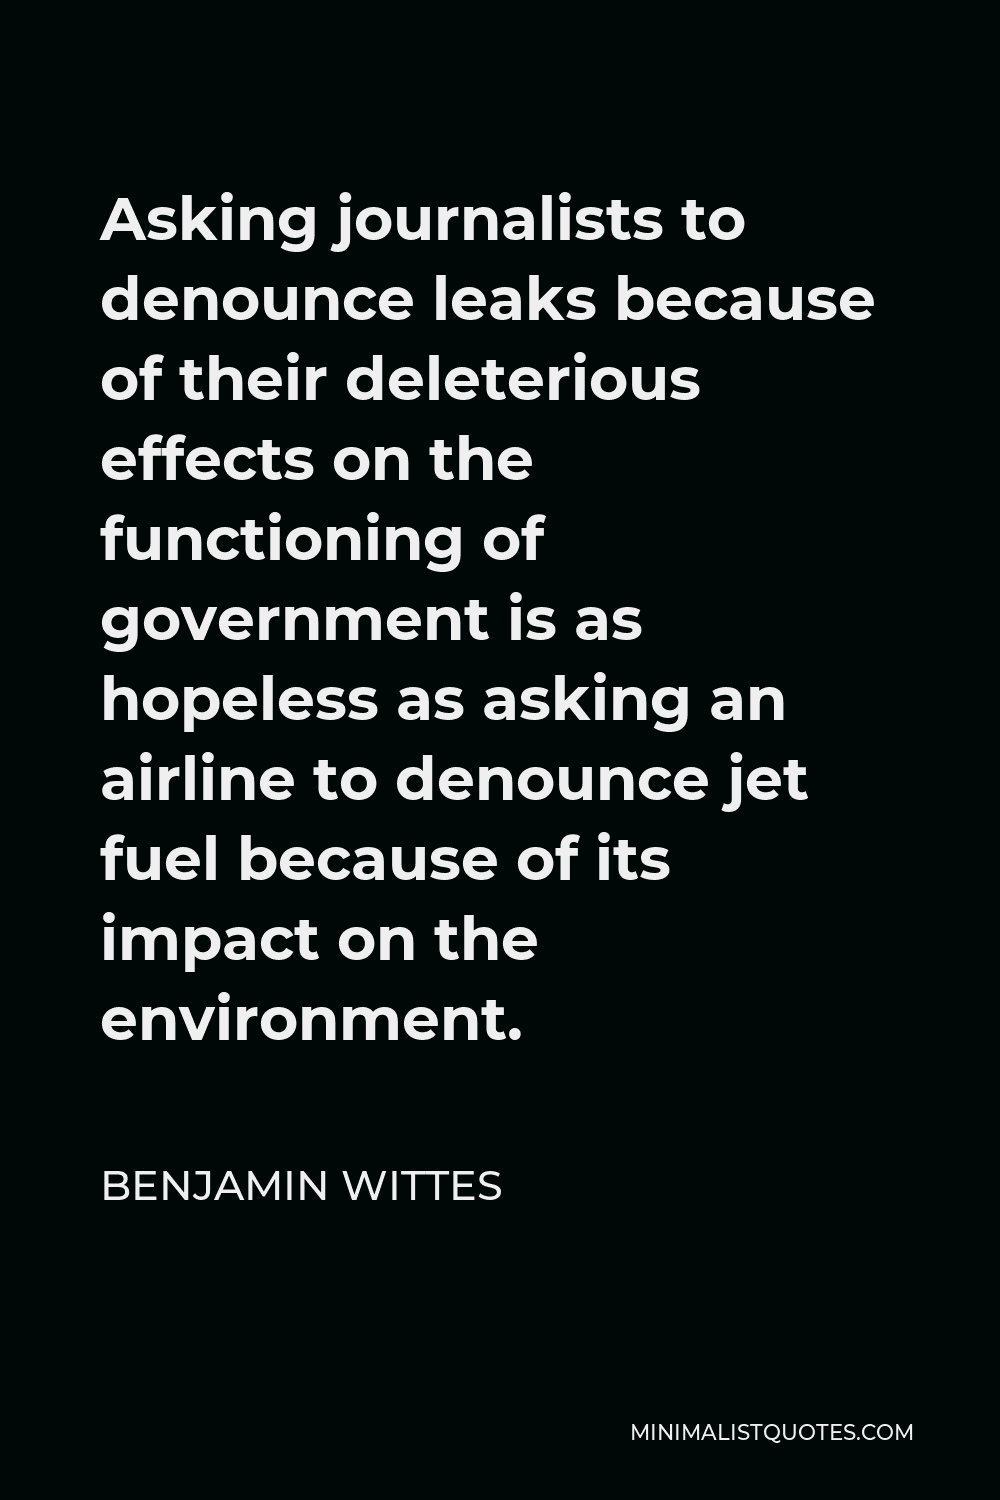 Benjamin Wittes Quote - Asking journalists to denounce leaks because of their deleterious effects on the functioning of government is as hopeless as asking an airline to denounce jet fuel because of its impact on the environment.